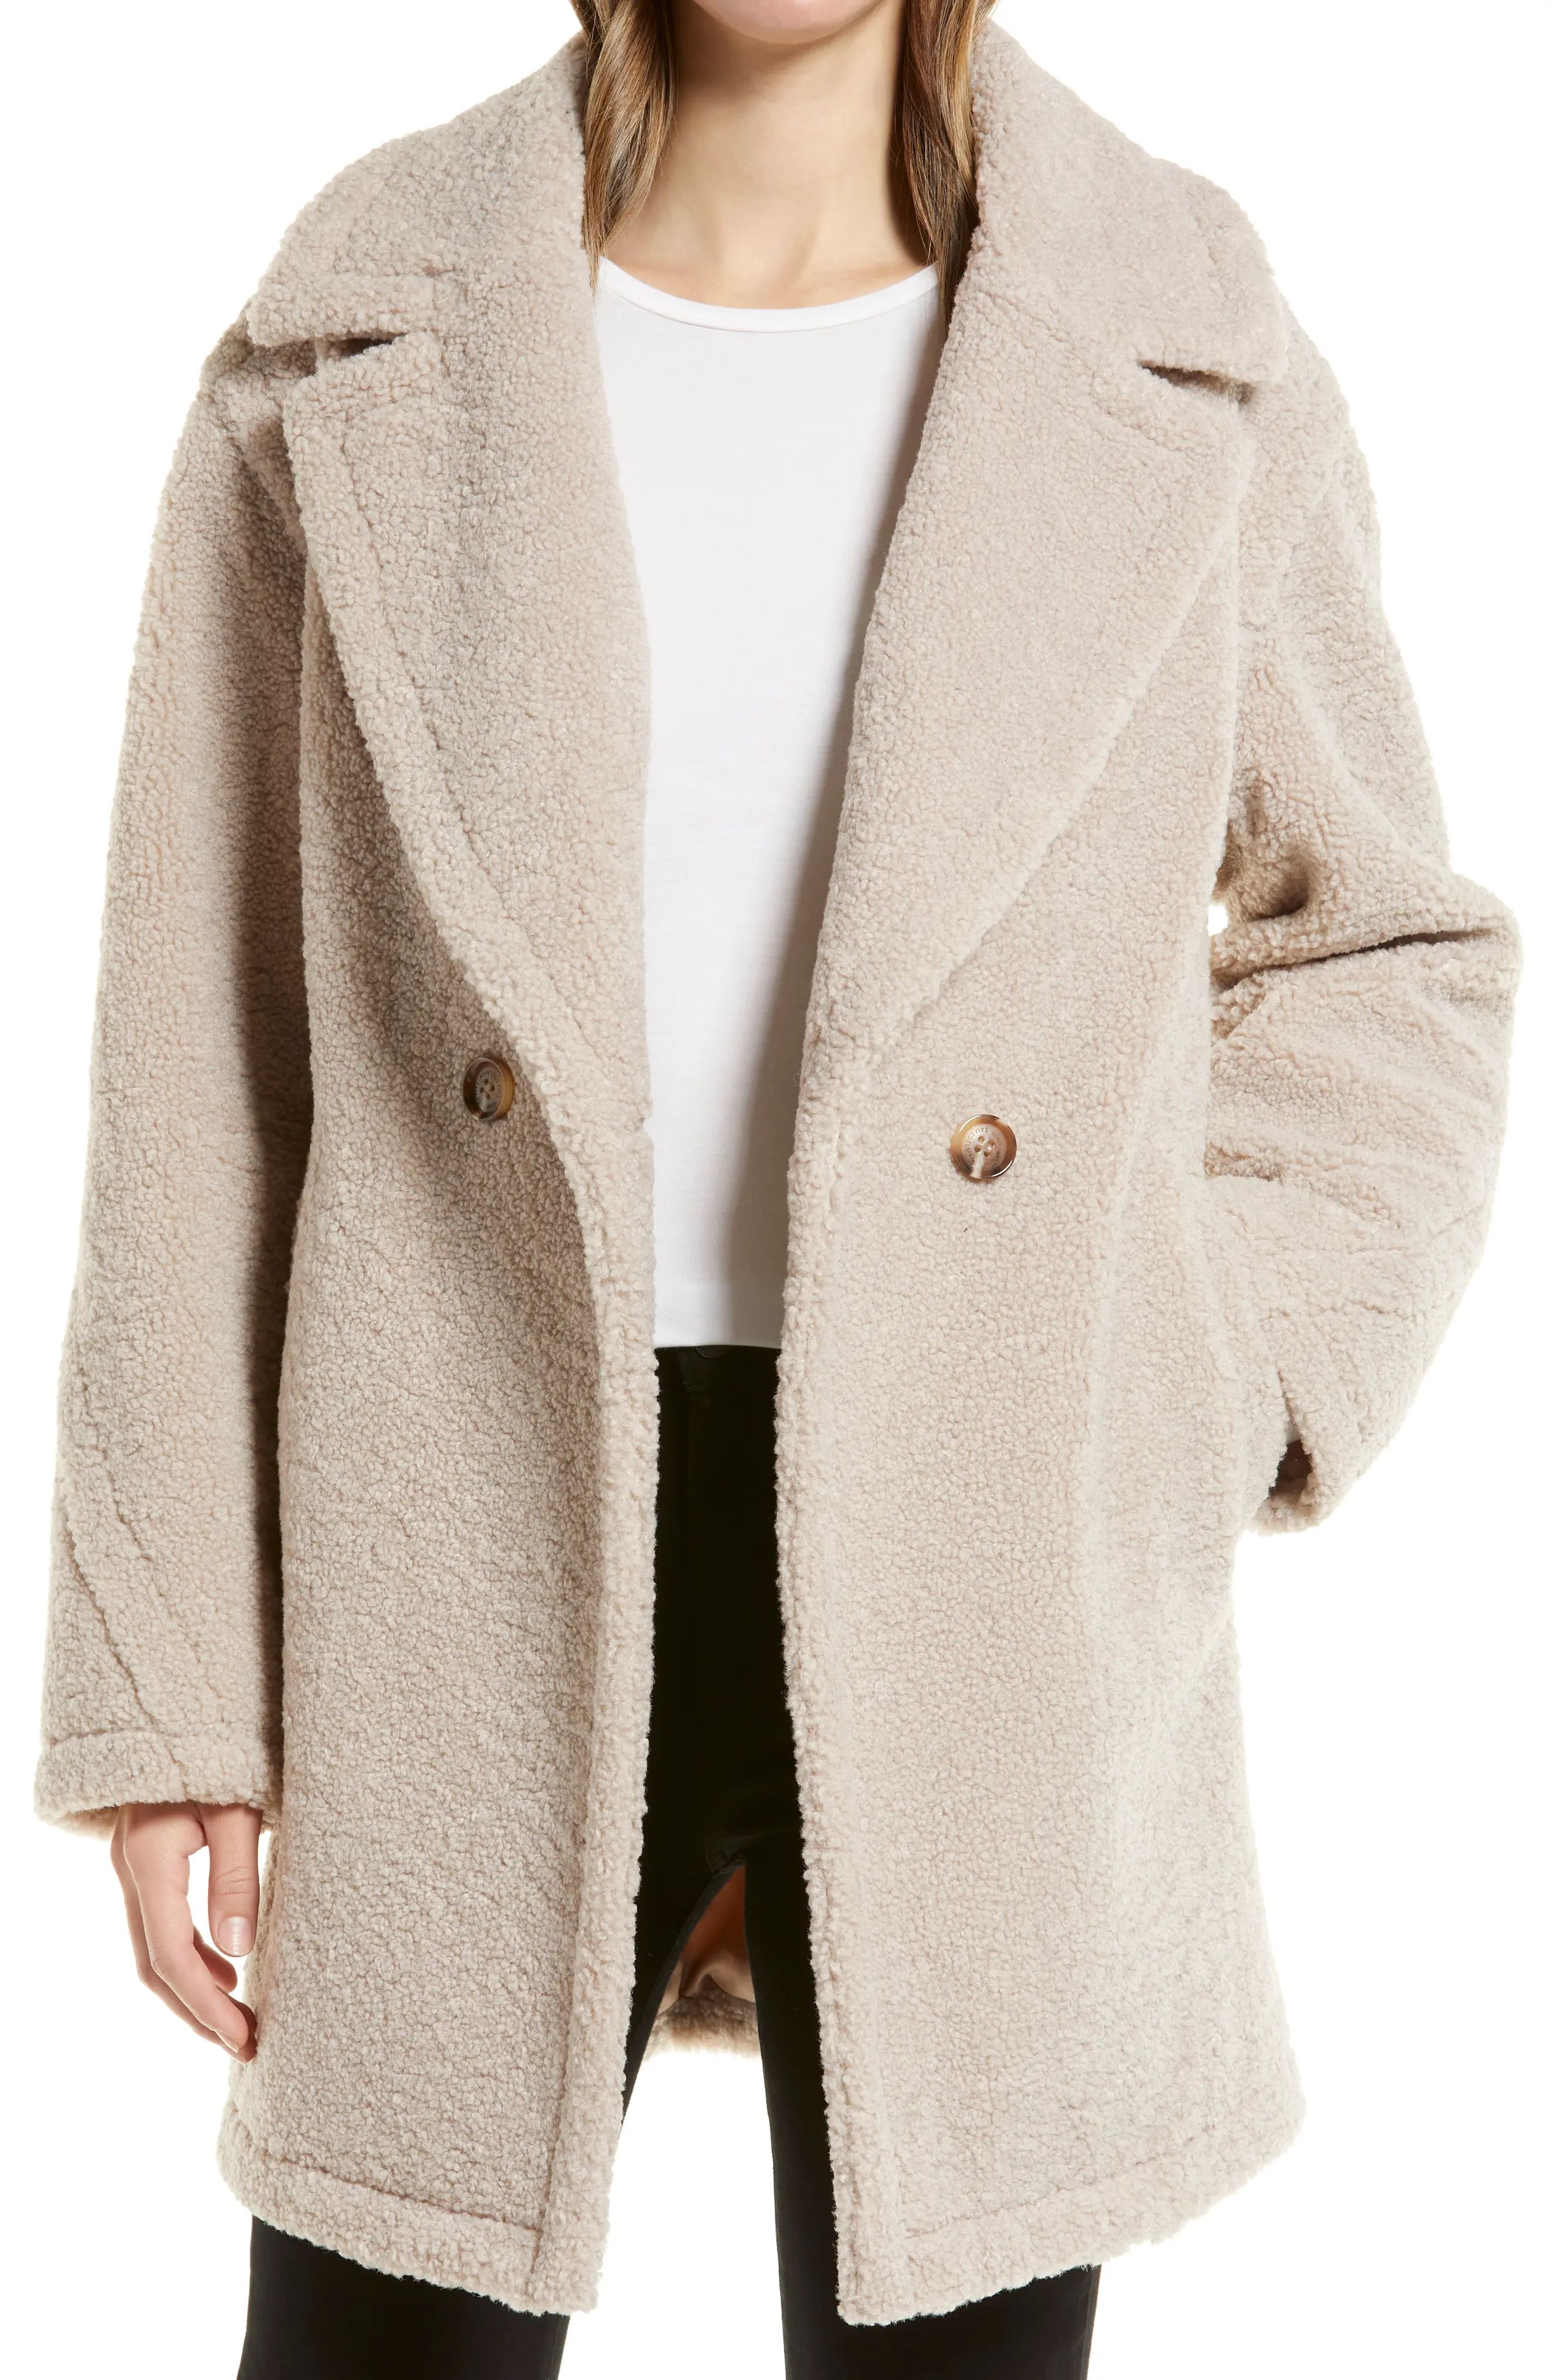 Sam Edelman Faux Shearling Teddy Jacket, Size Xx-Large in Beige at Nordstrom | Nordstrom